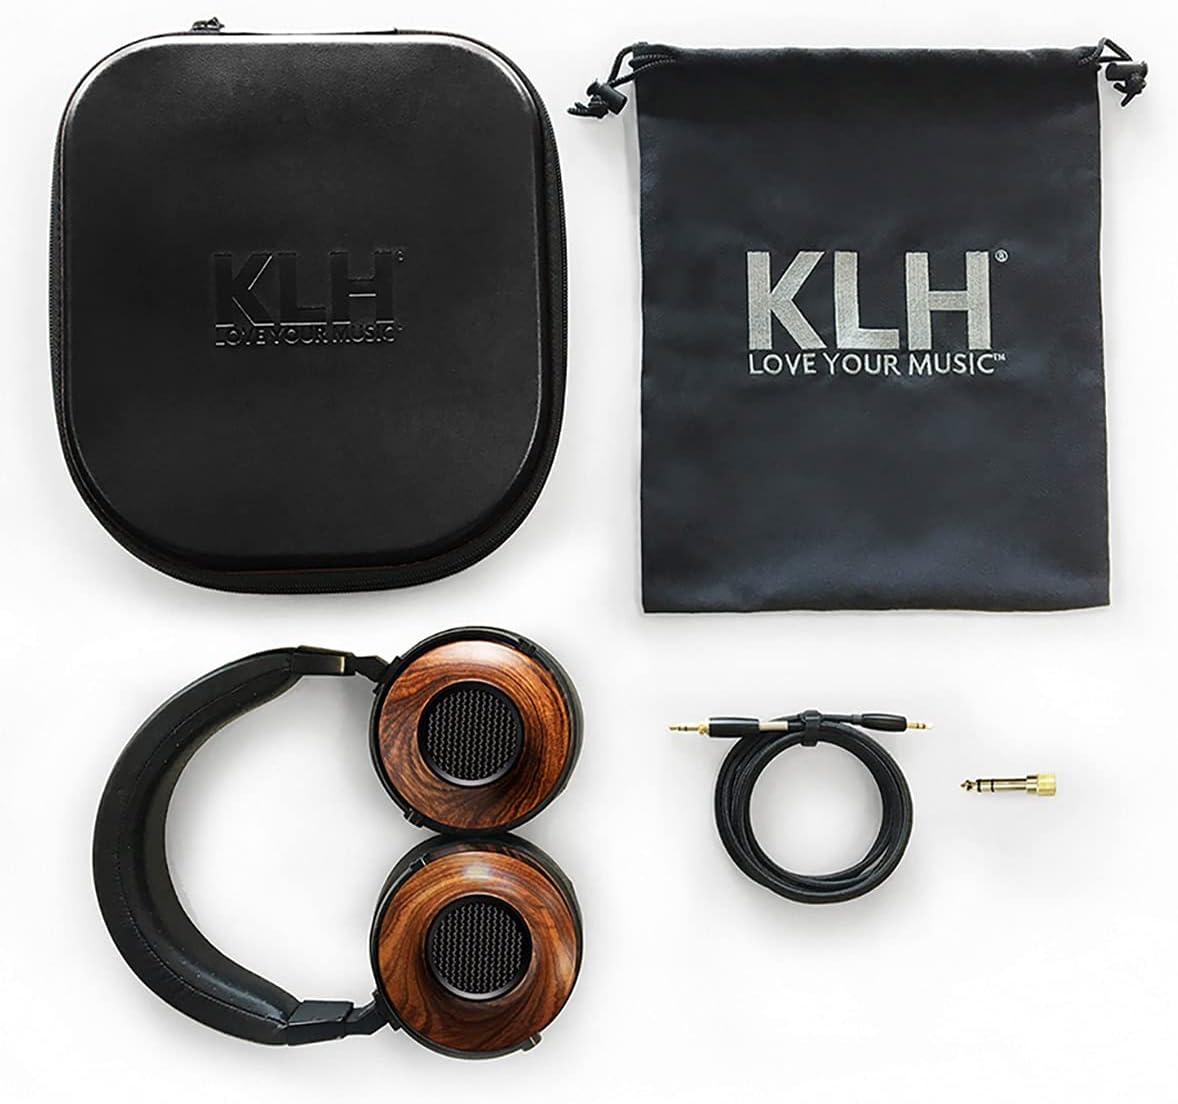 KLH Ultimate One-wired-KLH-PremiumHIFI